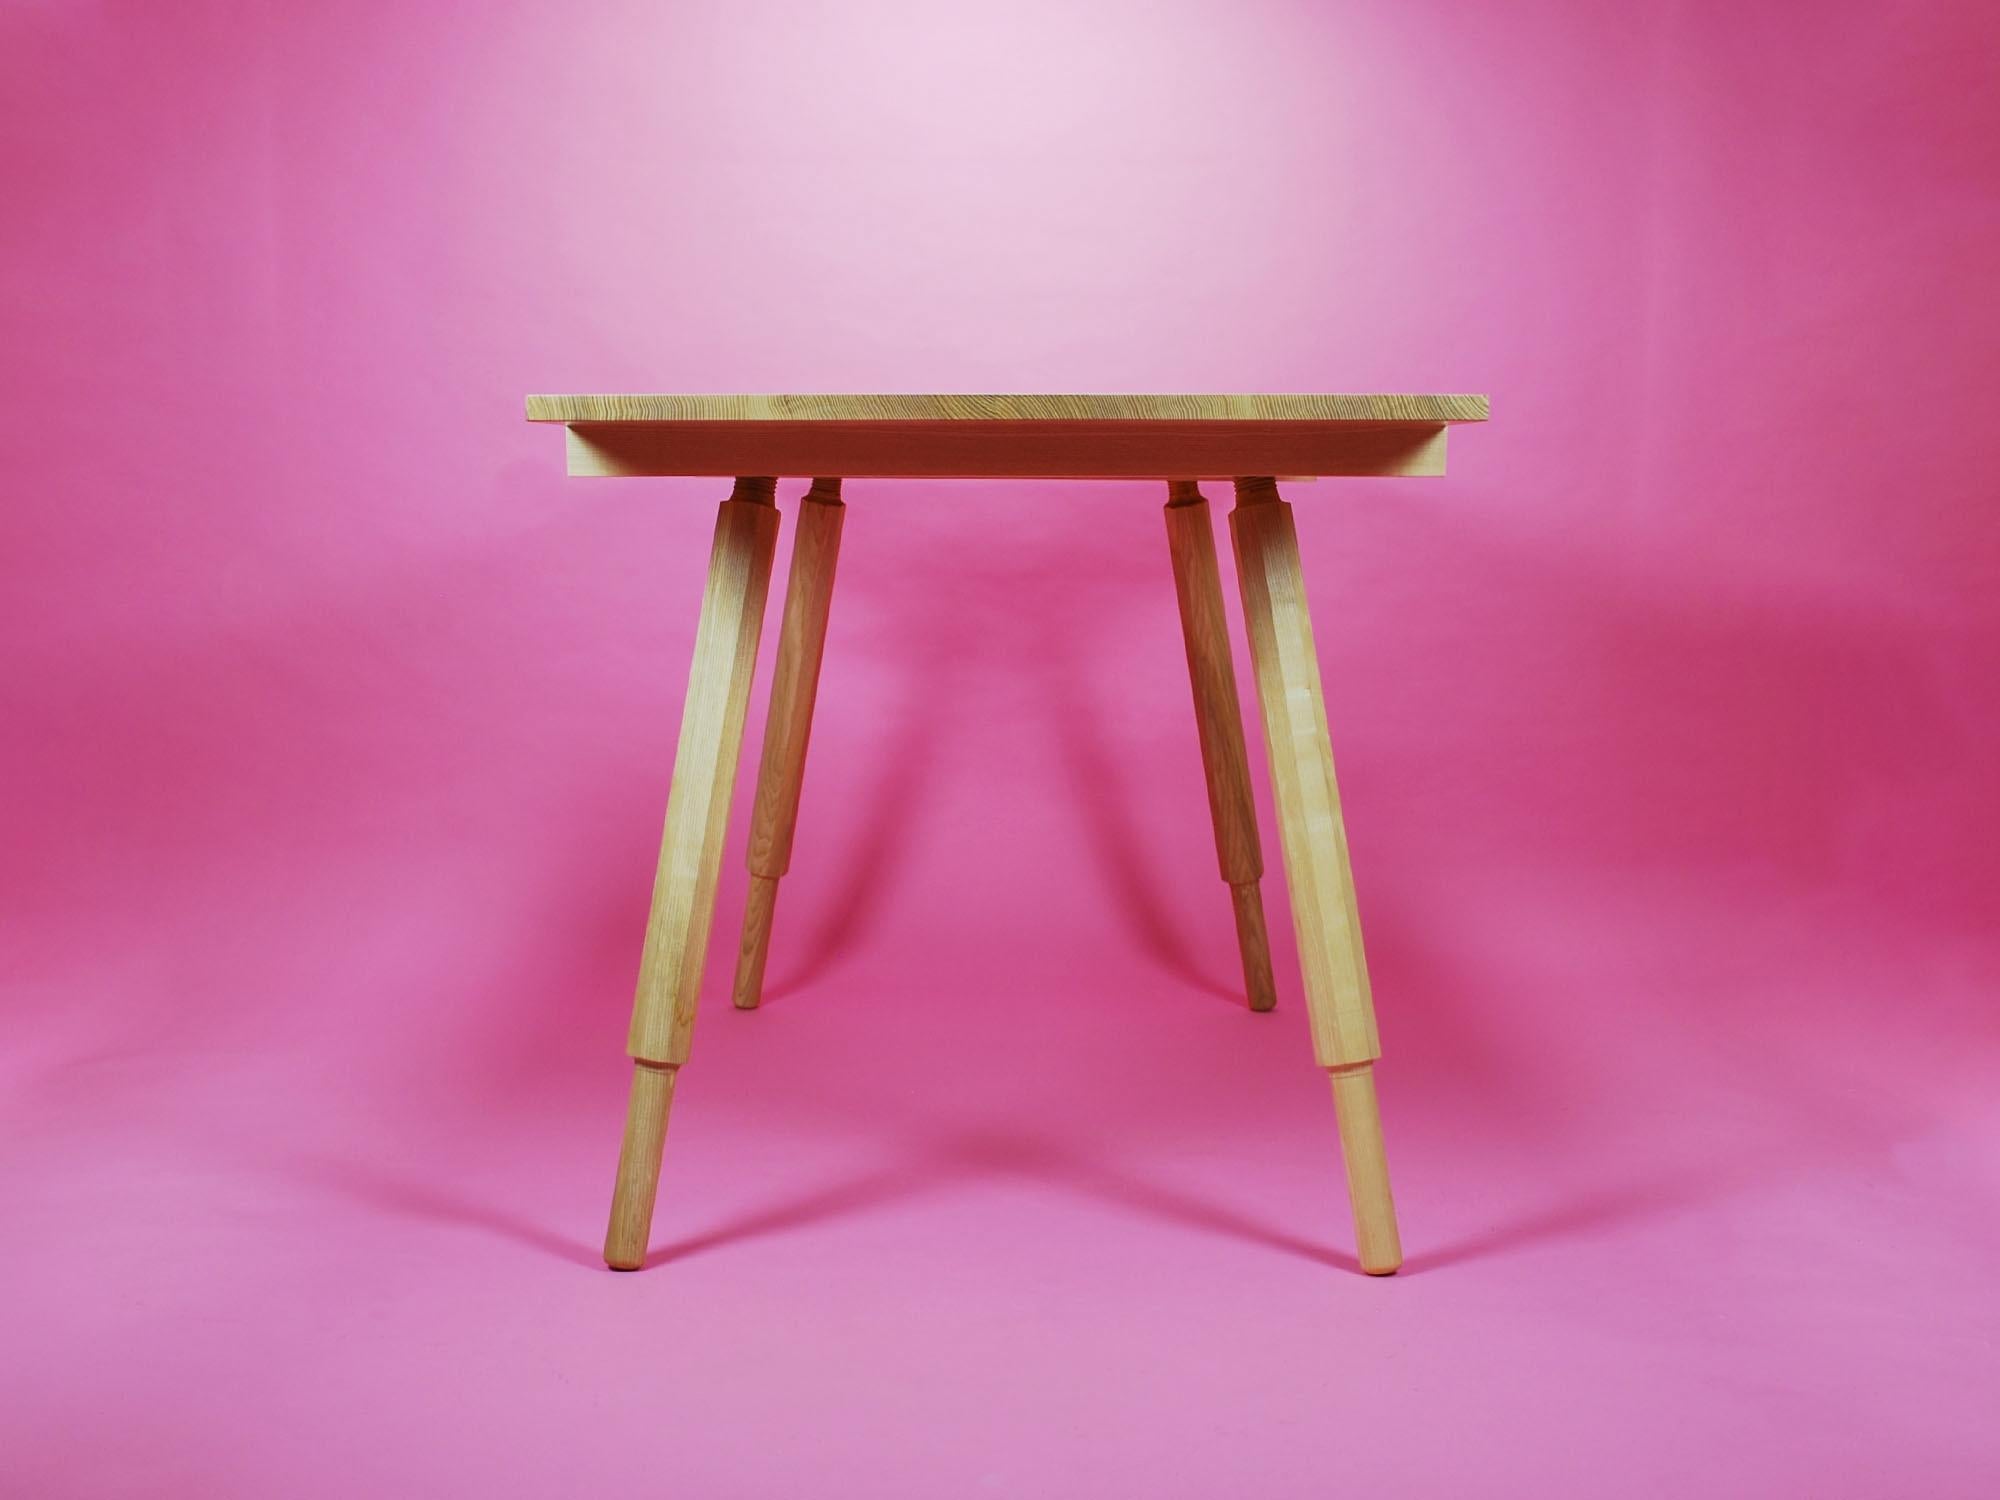 Hand-Crafted Dining Table, Solid Ash with Screw in Legs, Design by Loose Fit, UK For Sale